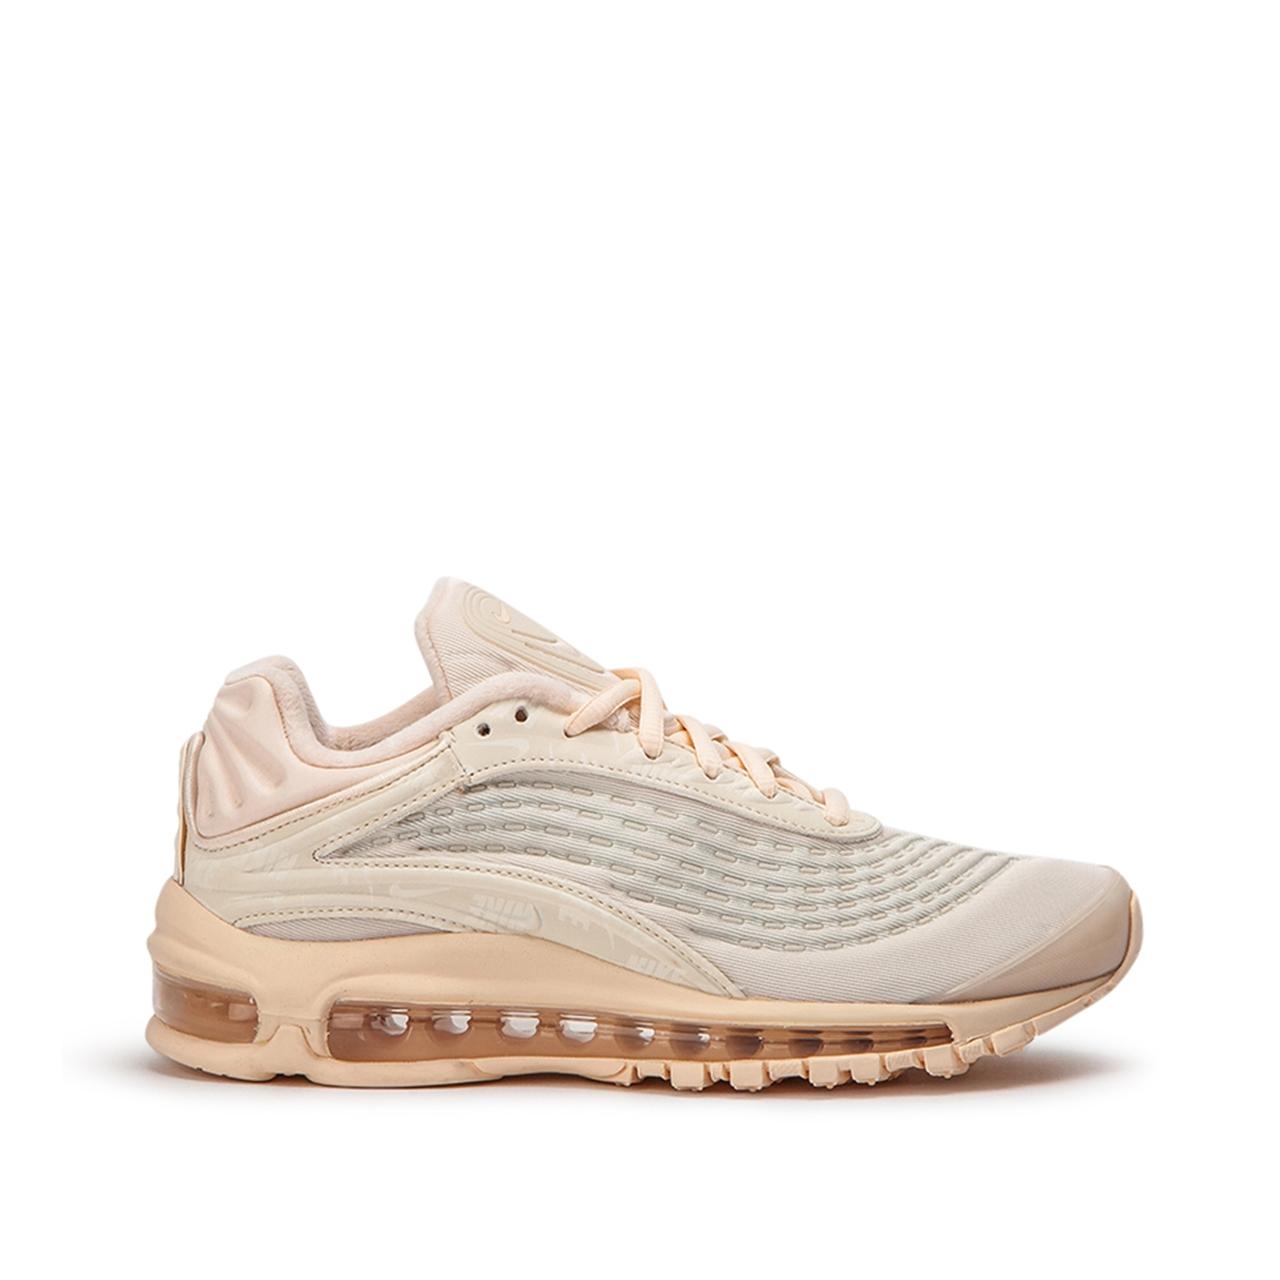 Nike WMNS Air Max Deluxe SE (Rosa 